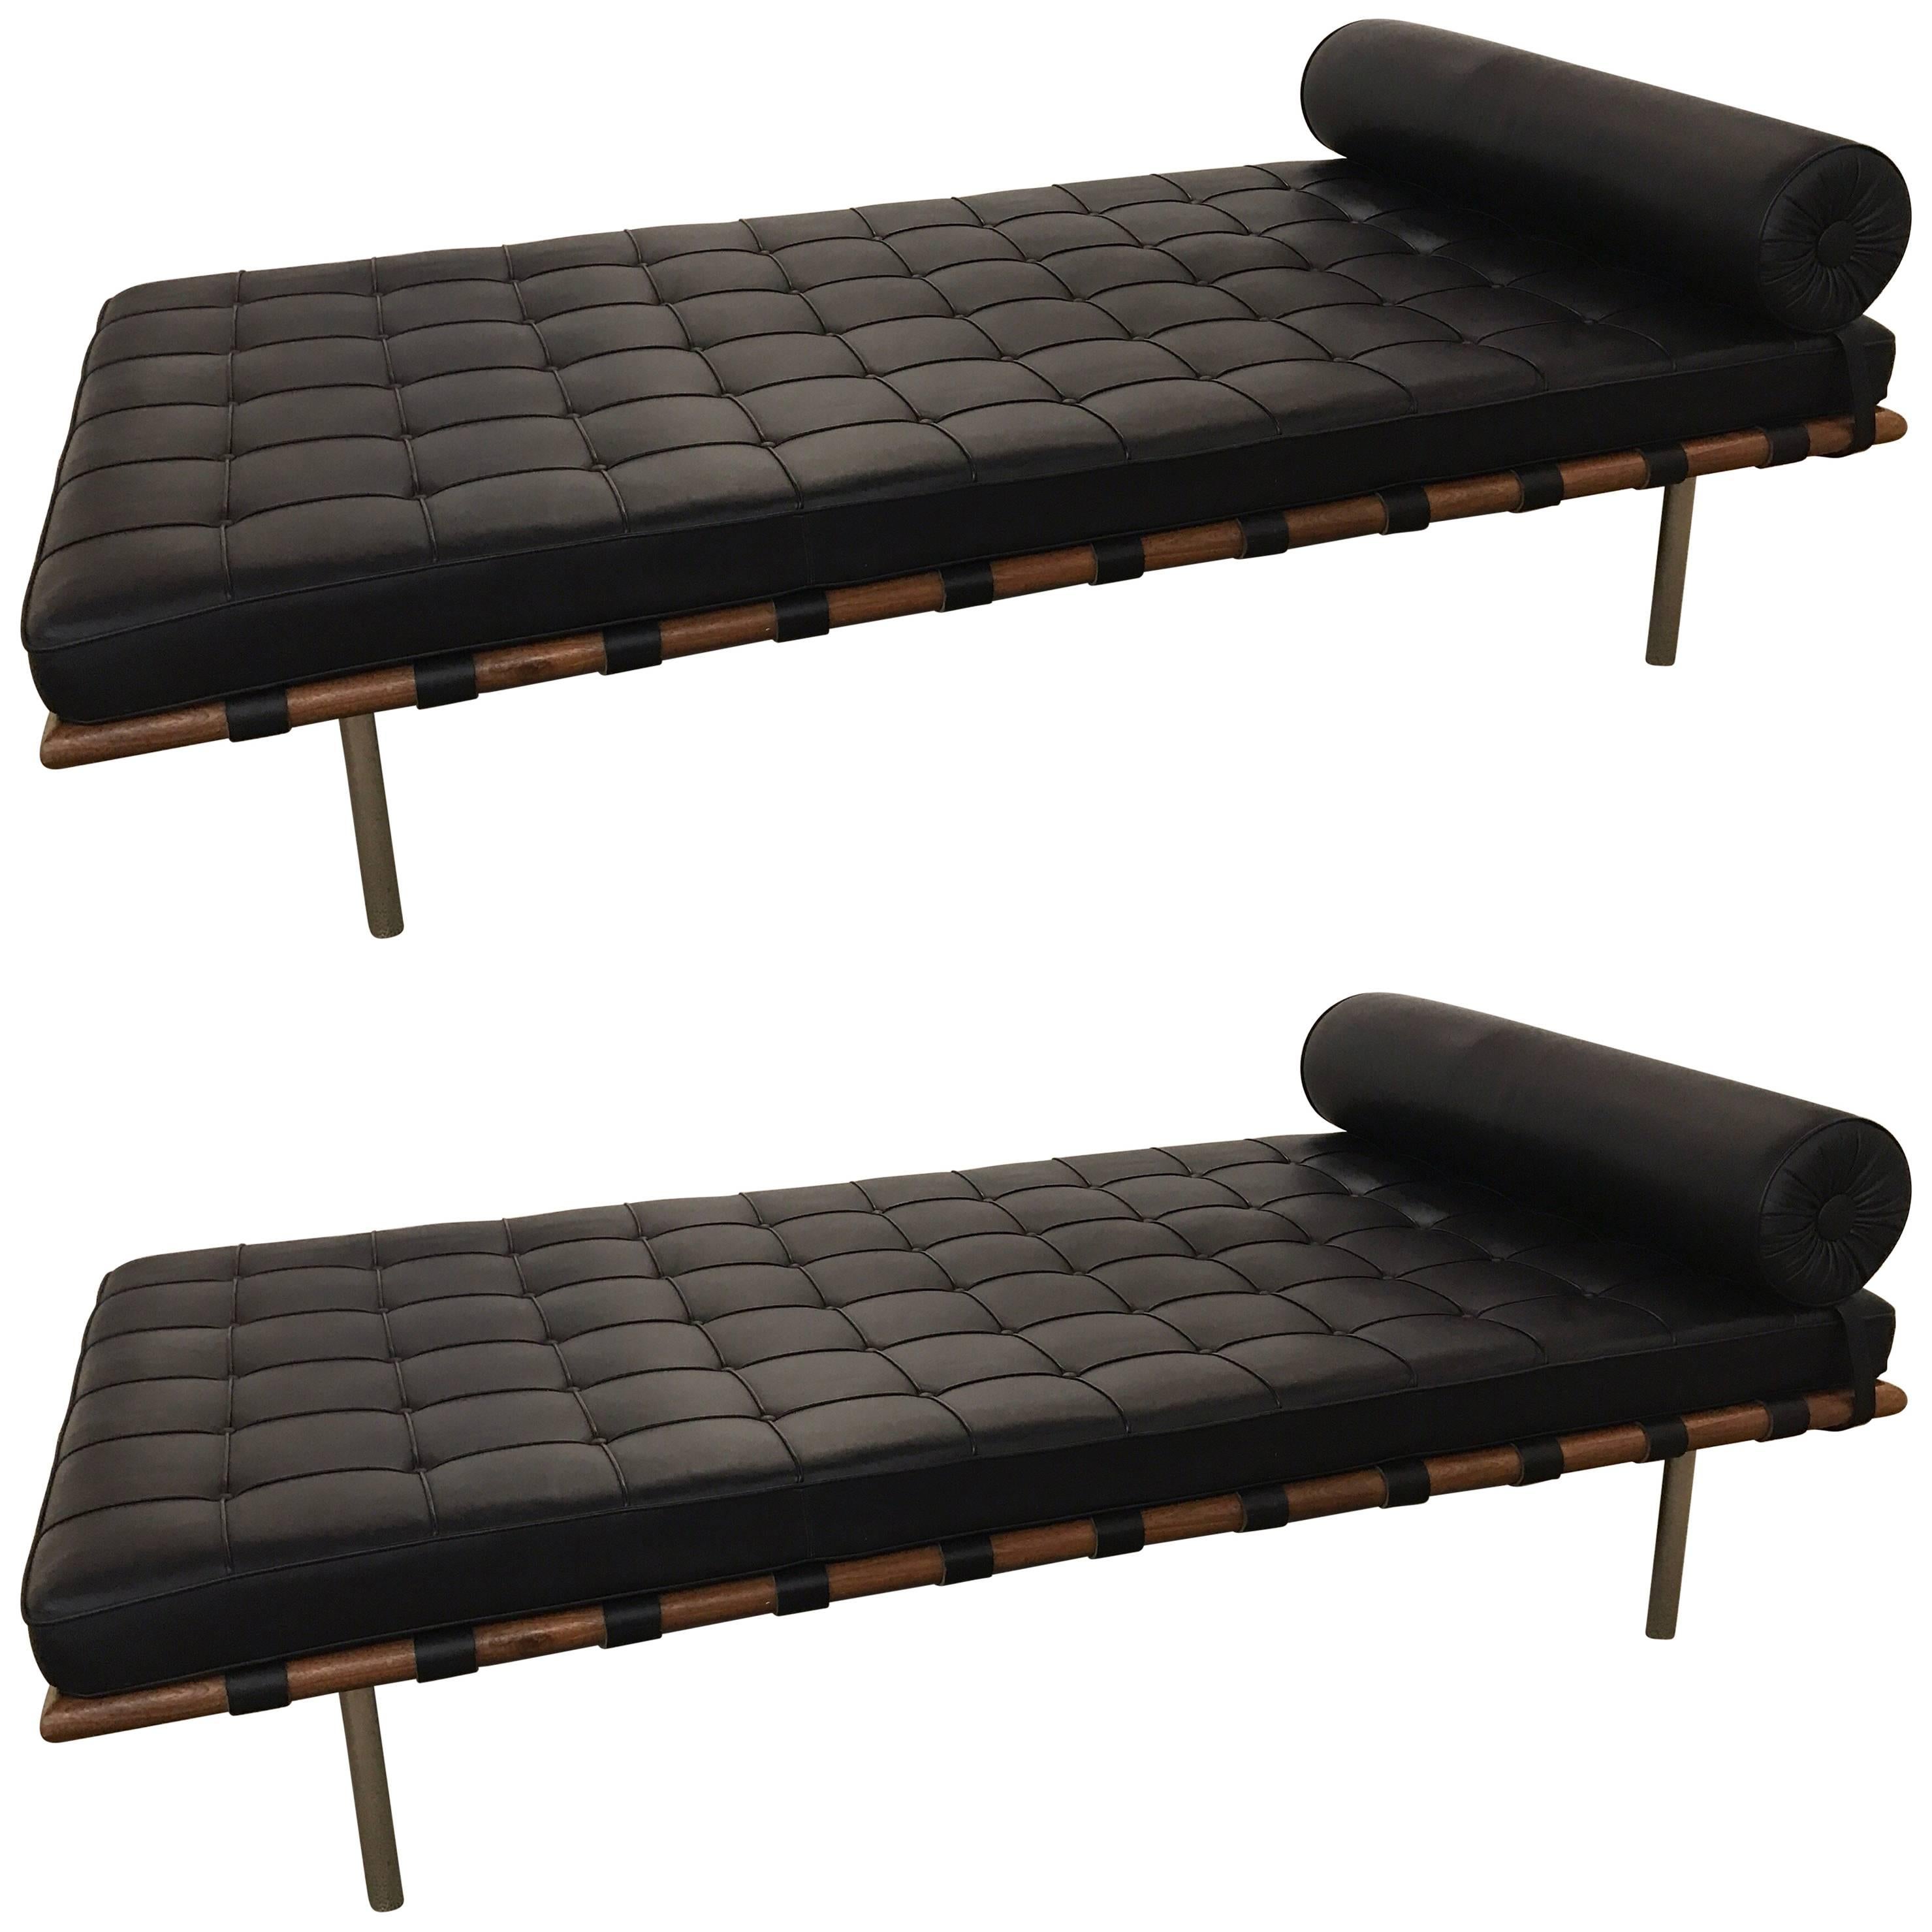 Pair of Signed Knoll Barcelona Black Leather Daybeds Ludwig Mies van der Rohe